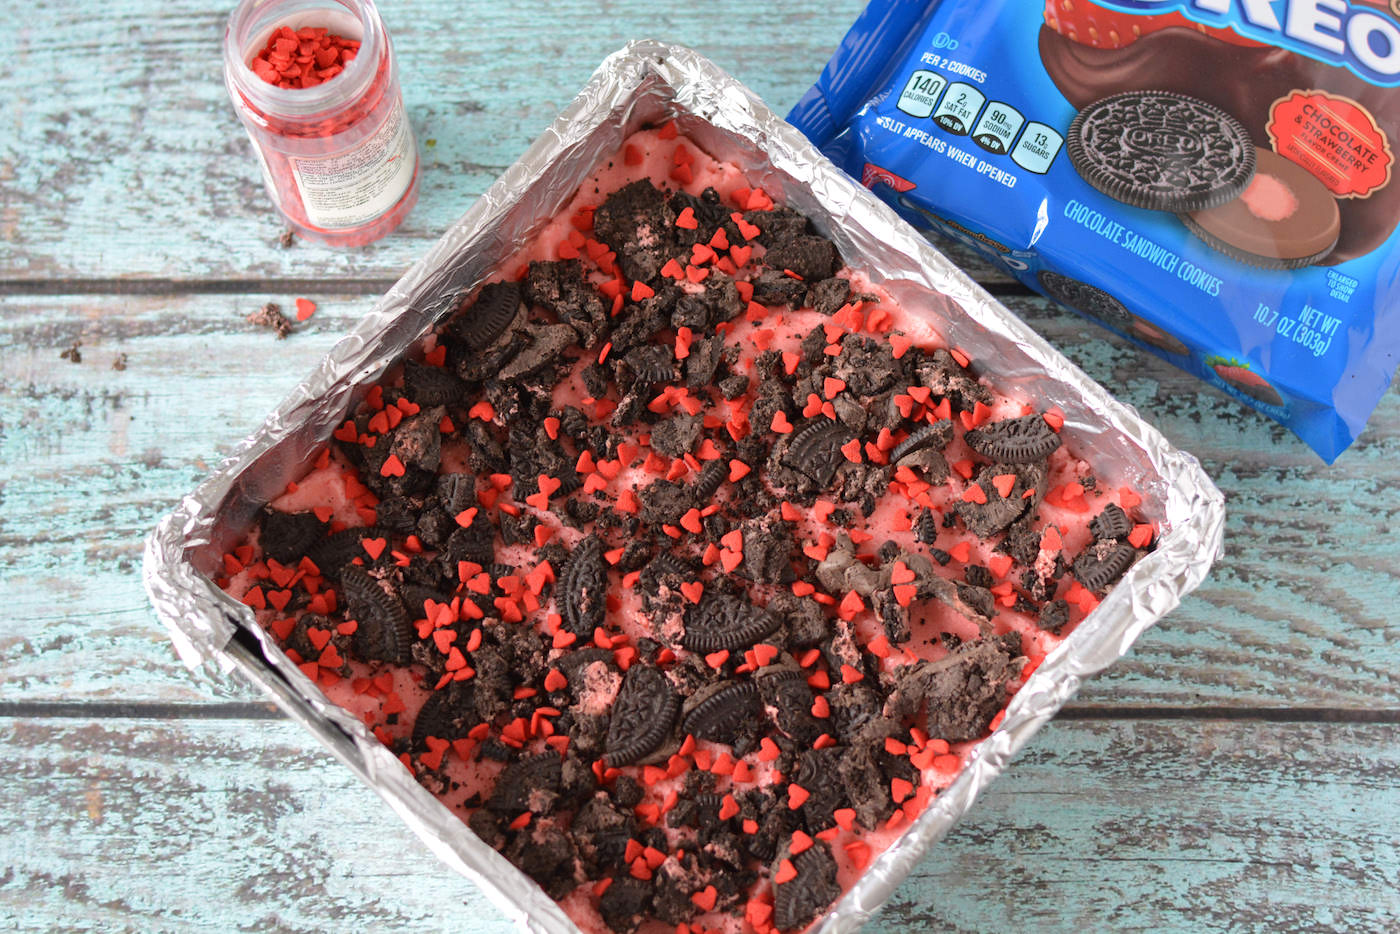 Oreos sprinkled on top of the brownie mix